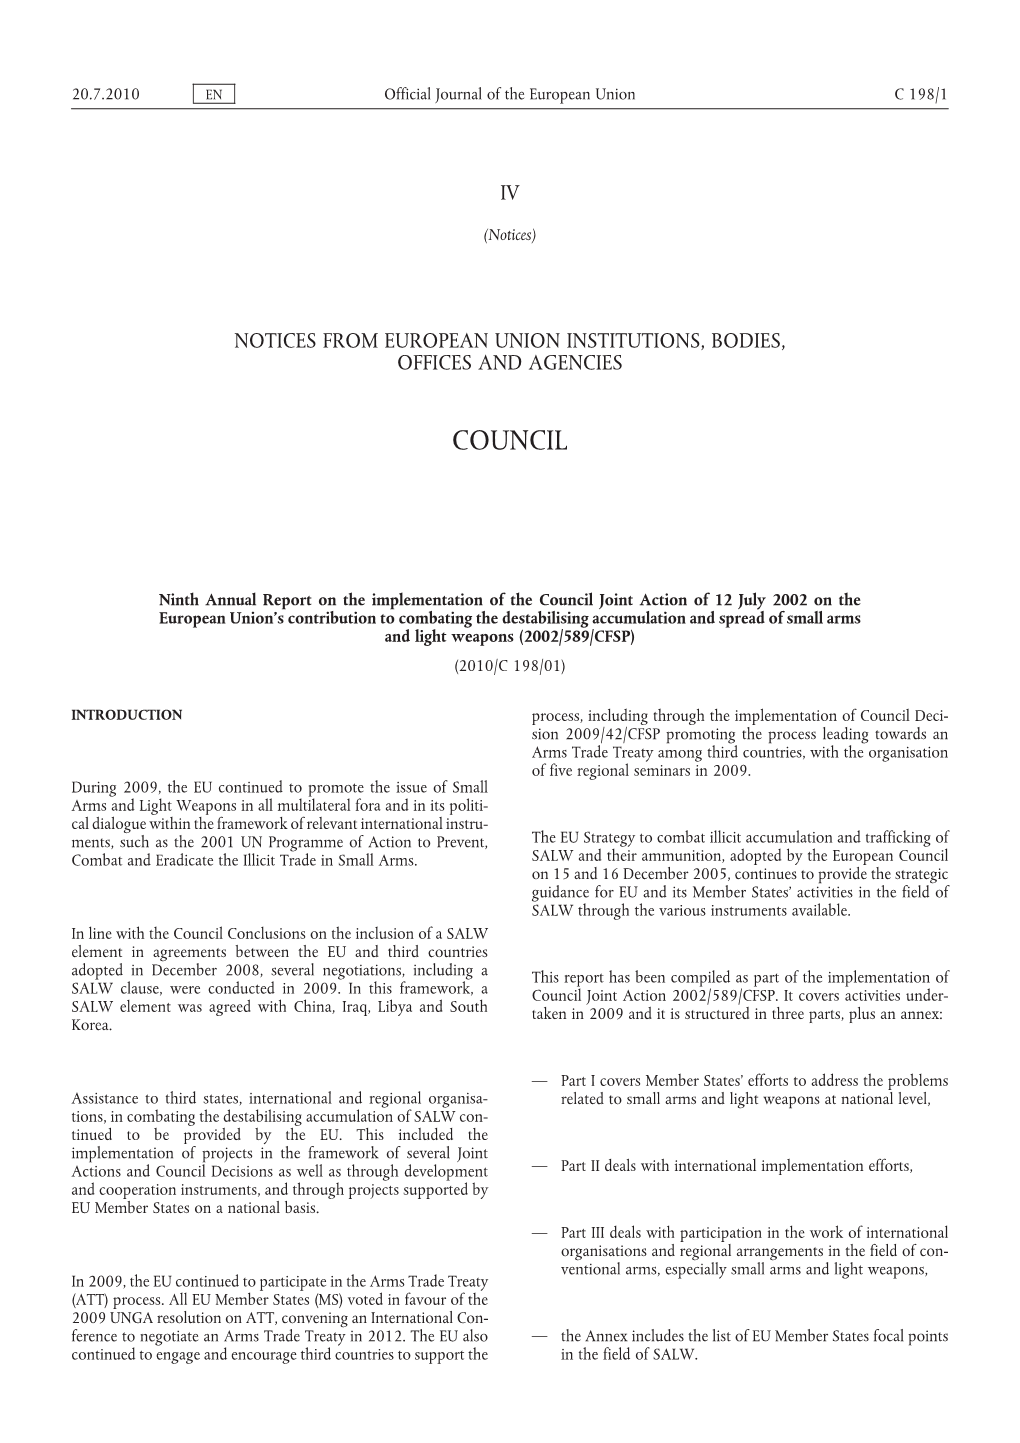 Ninth Annual Report on the Implementation of the Council Joint